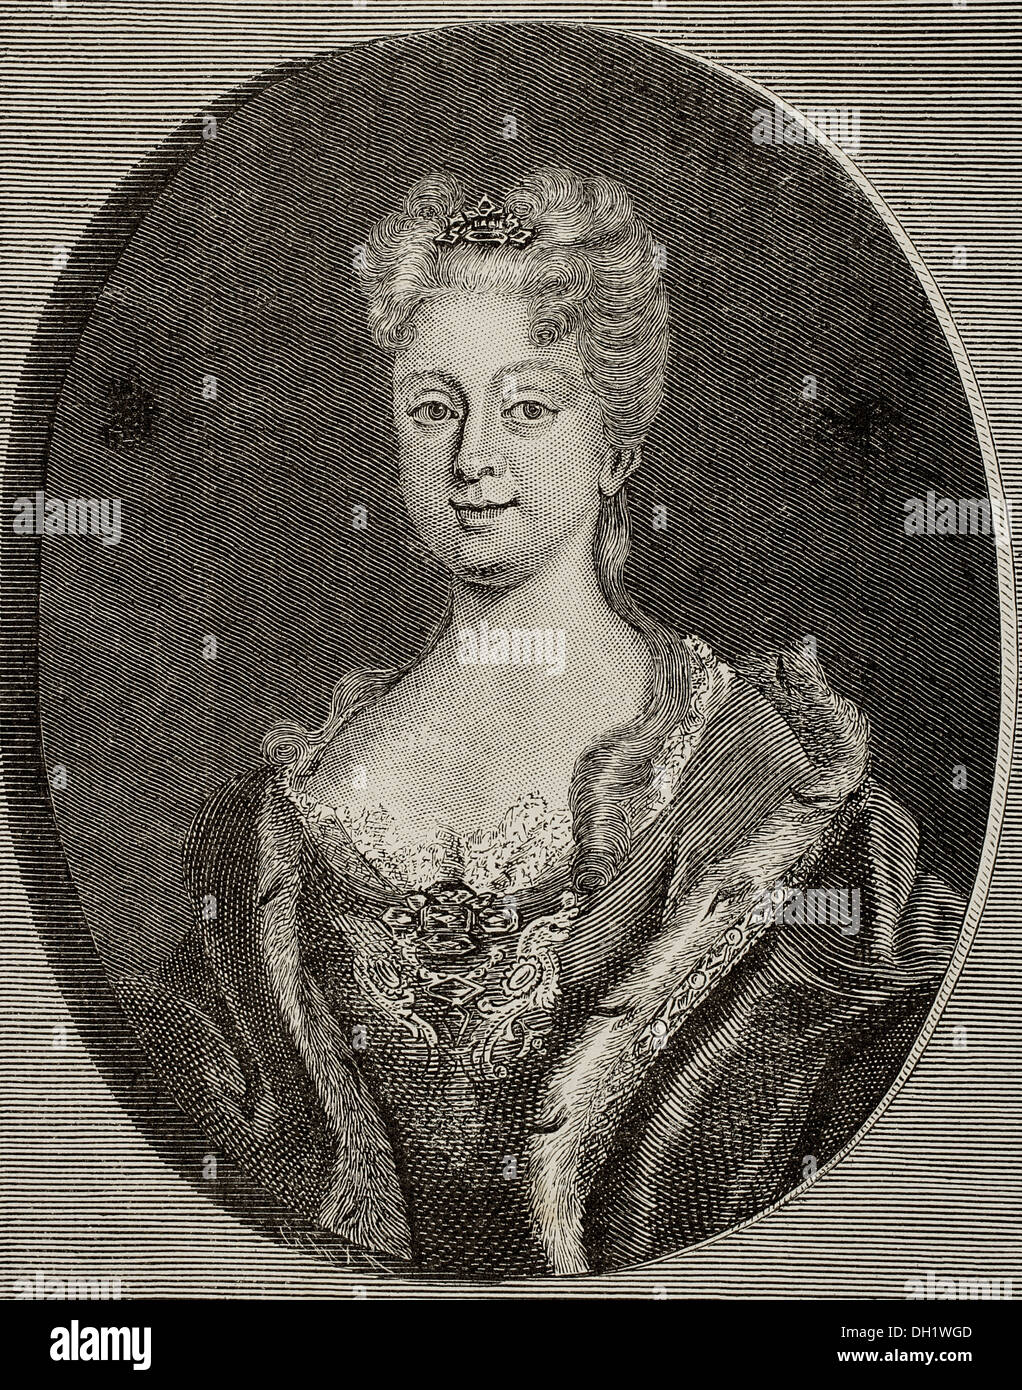 Elisabeth Farnese (1692-1766). Queen consort of Spain, wife of Philip V. Copy of an engraving of the time. Stock Photo